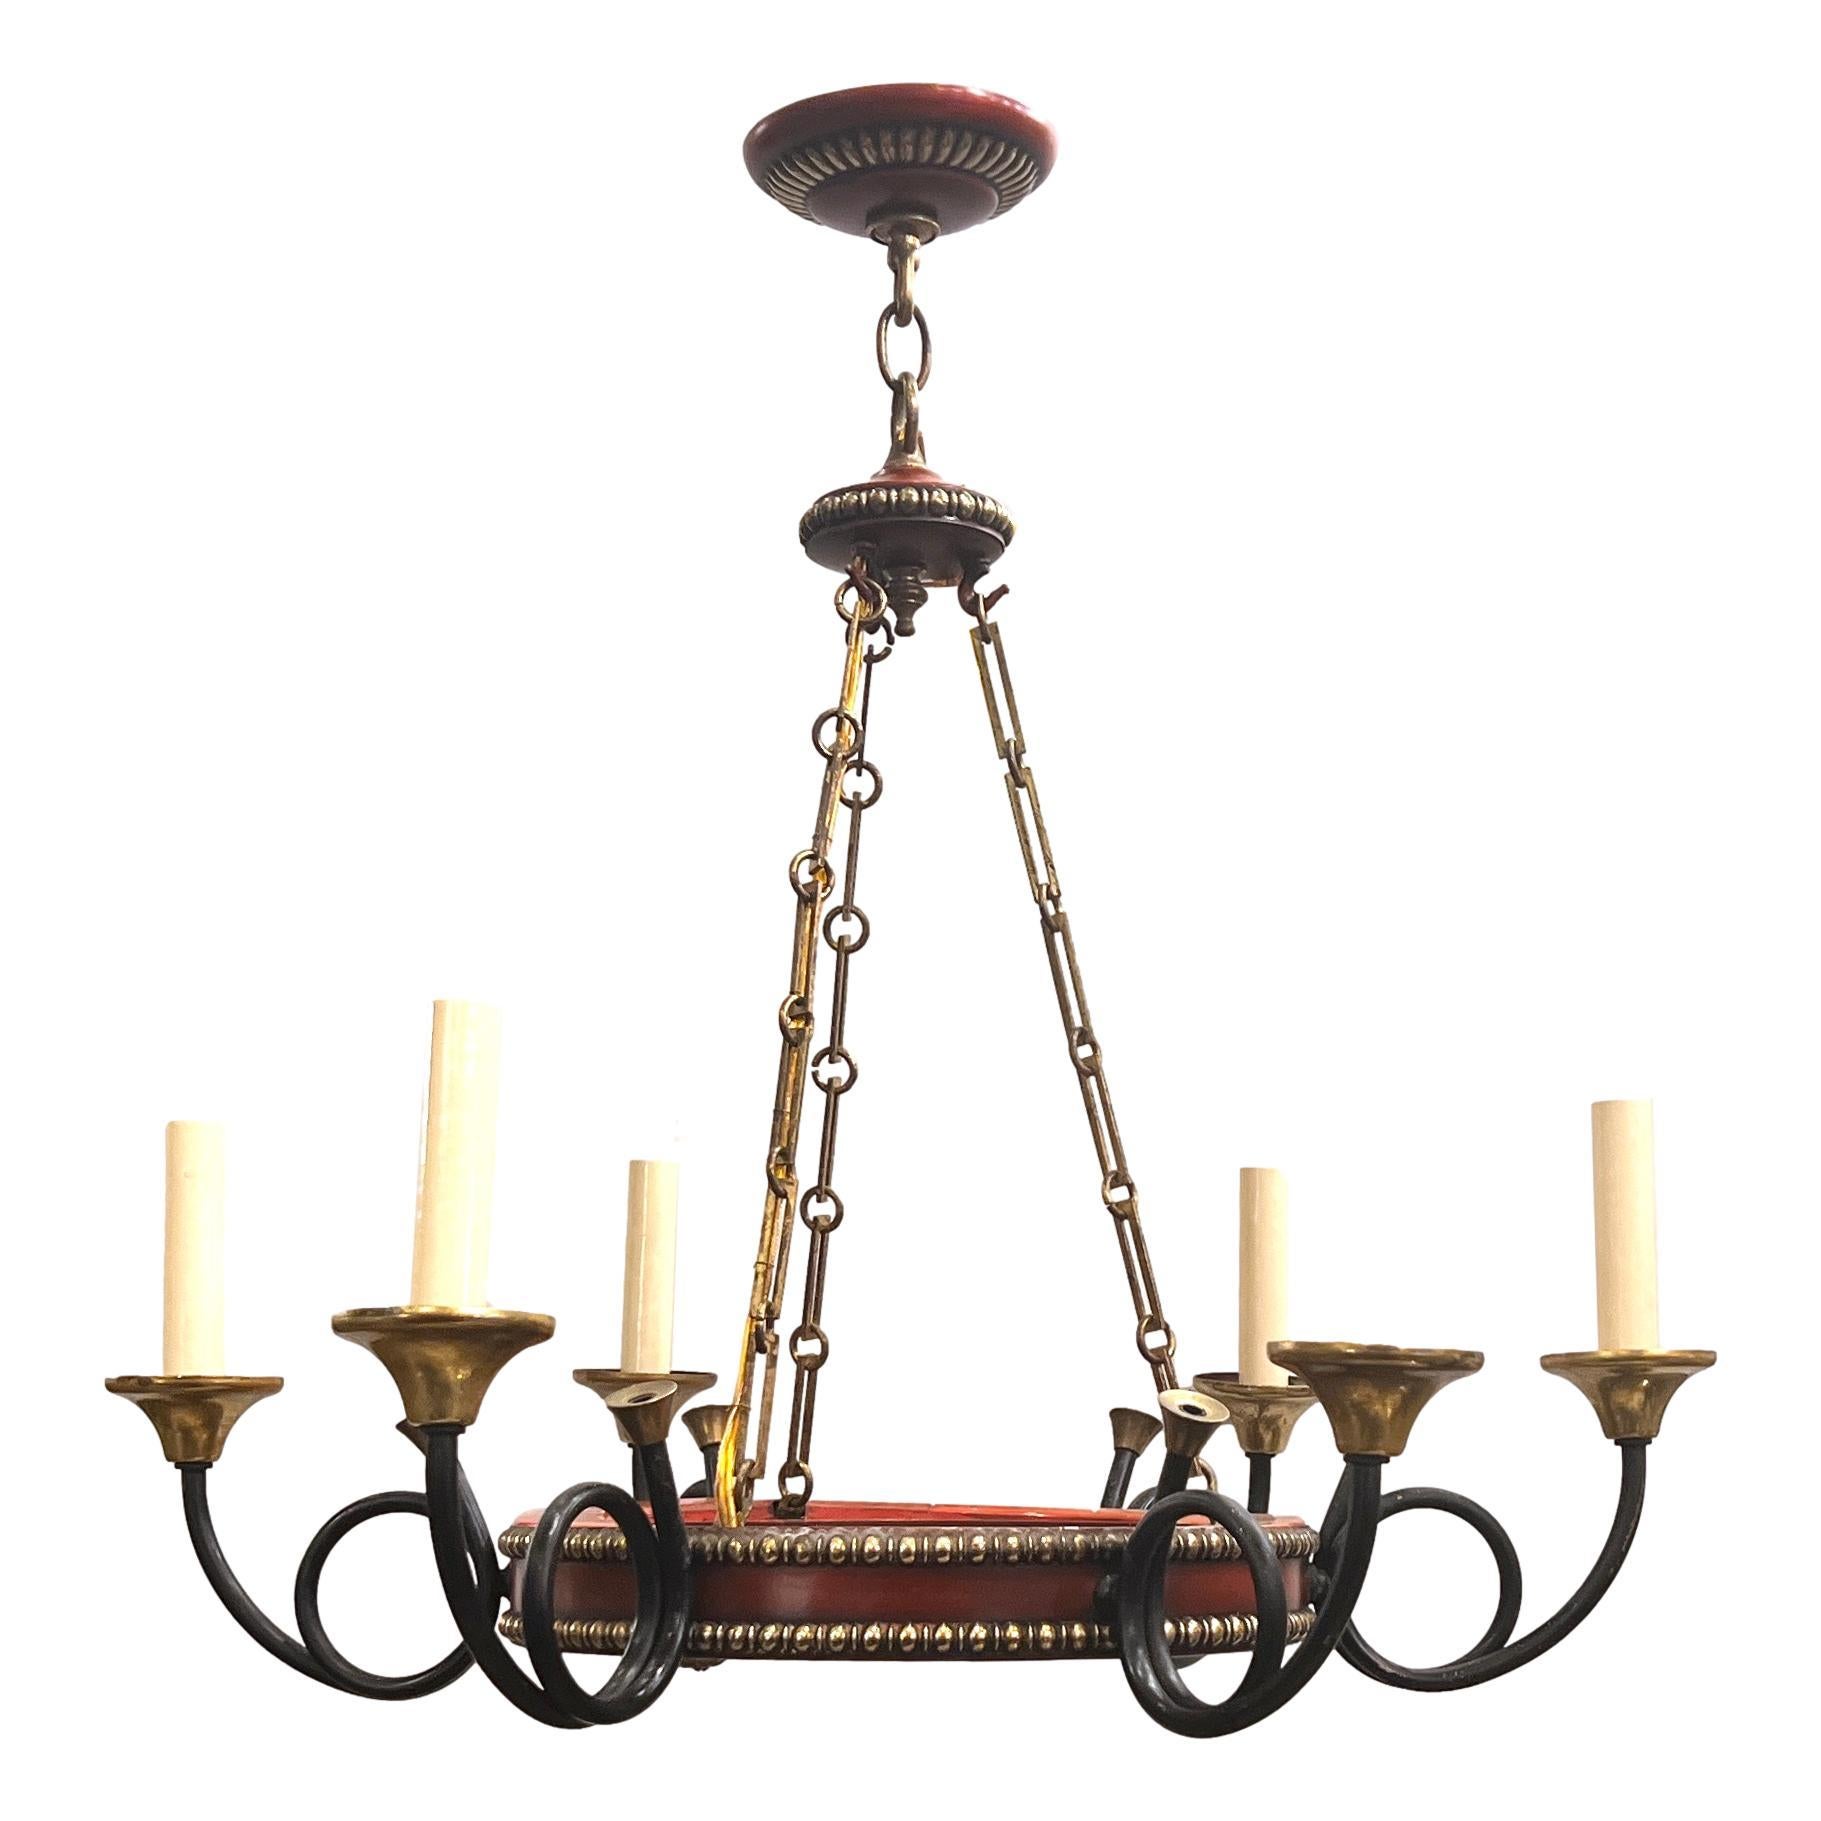 A circa 1950's French painted tole and gilt bronze chandelier.

Measurements:
Drop: 25